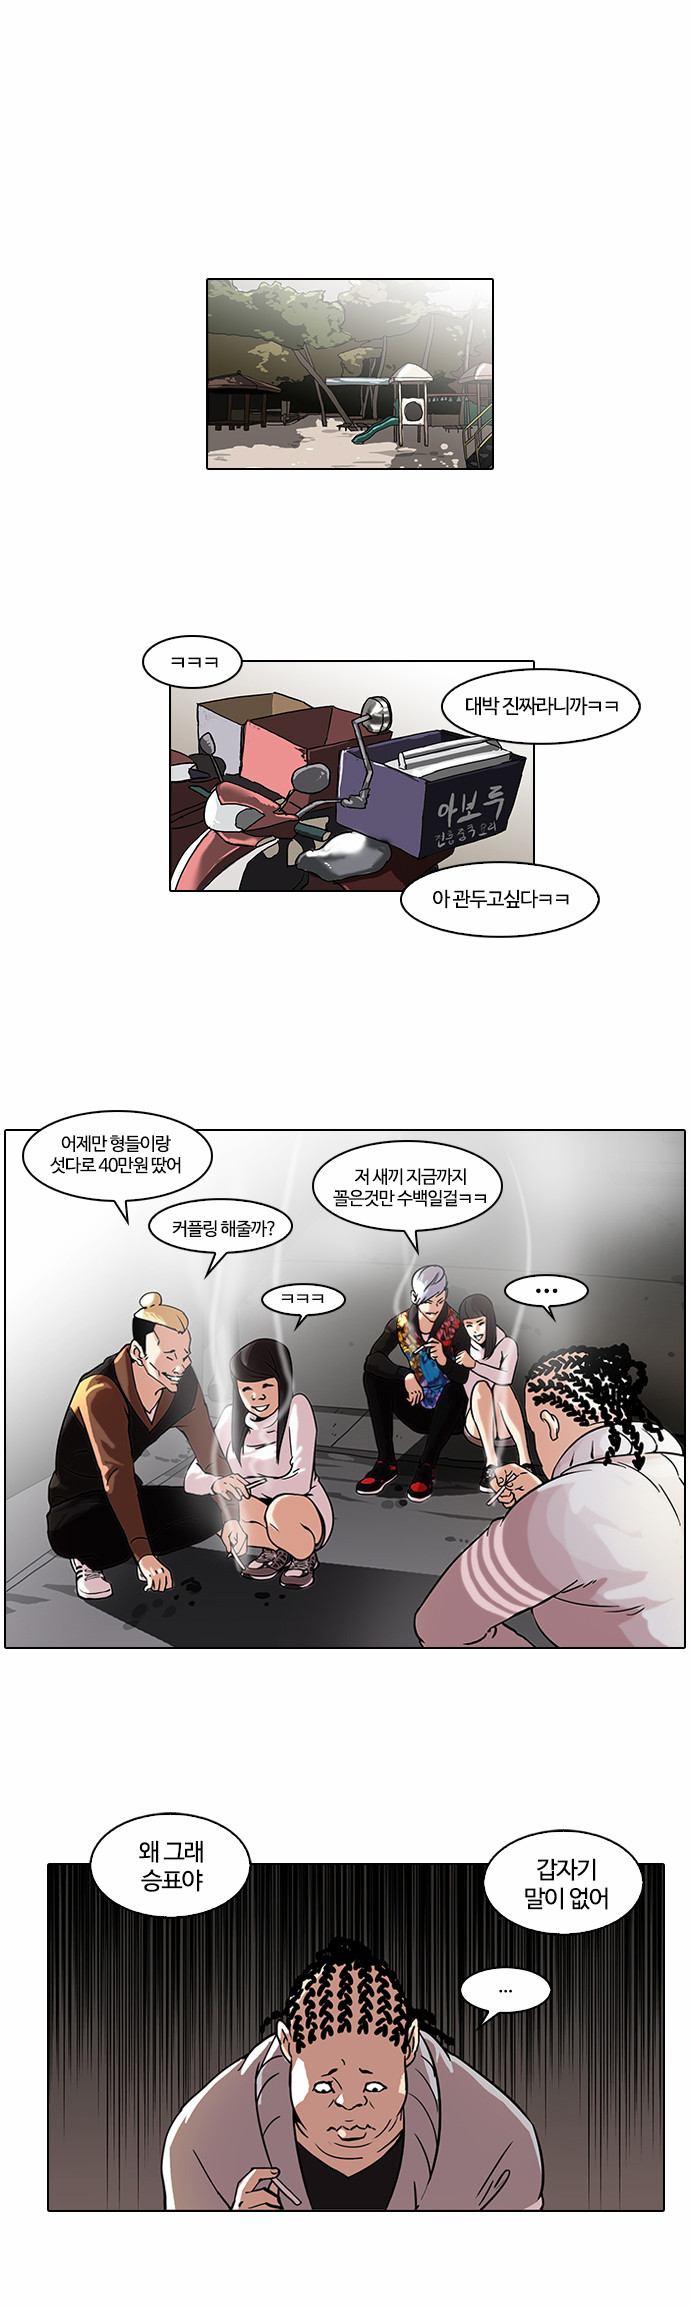 Lookism - Chapter 57 - Page 2